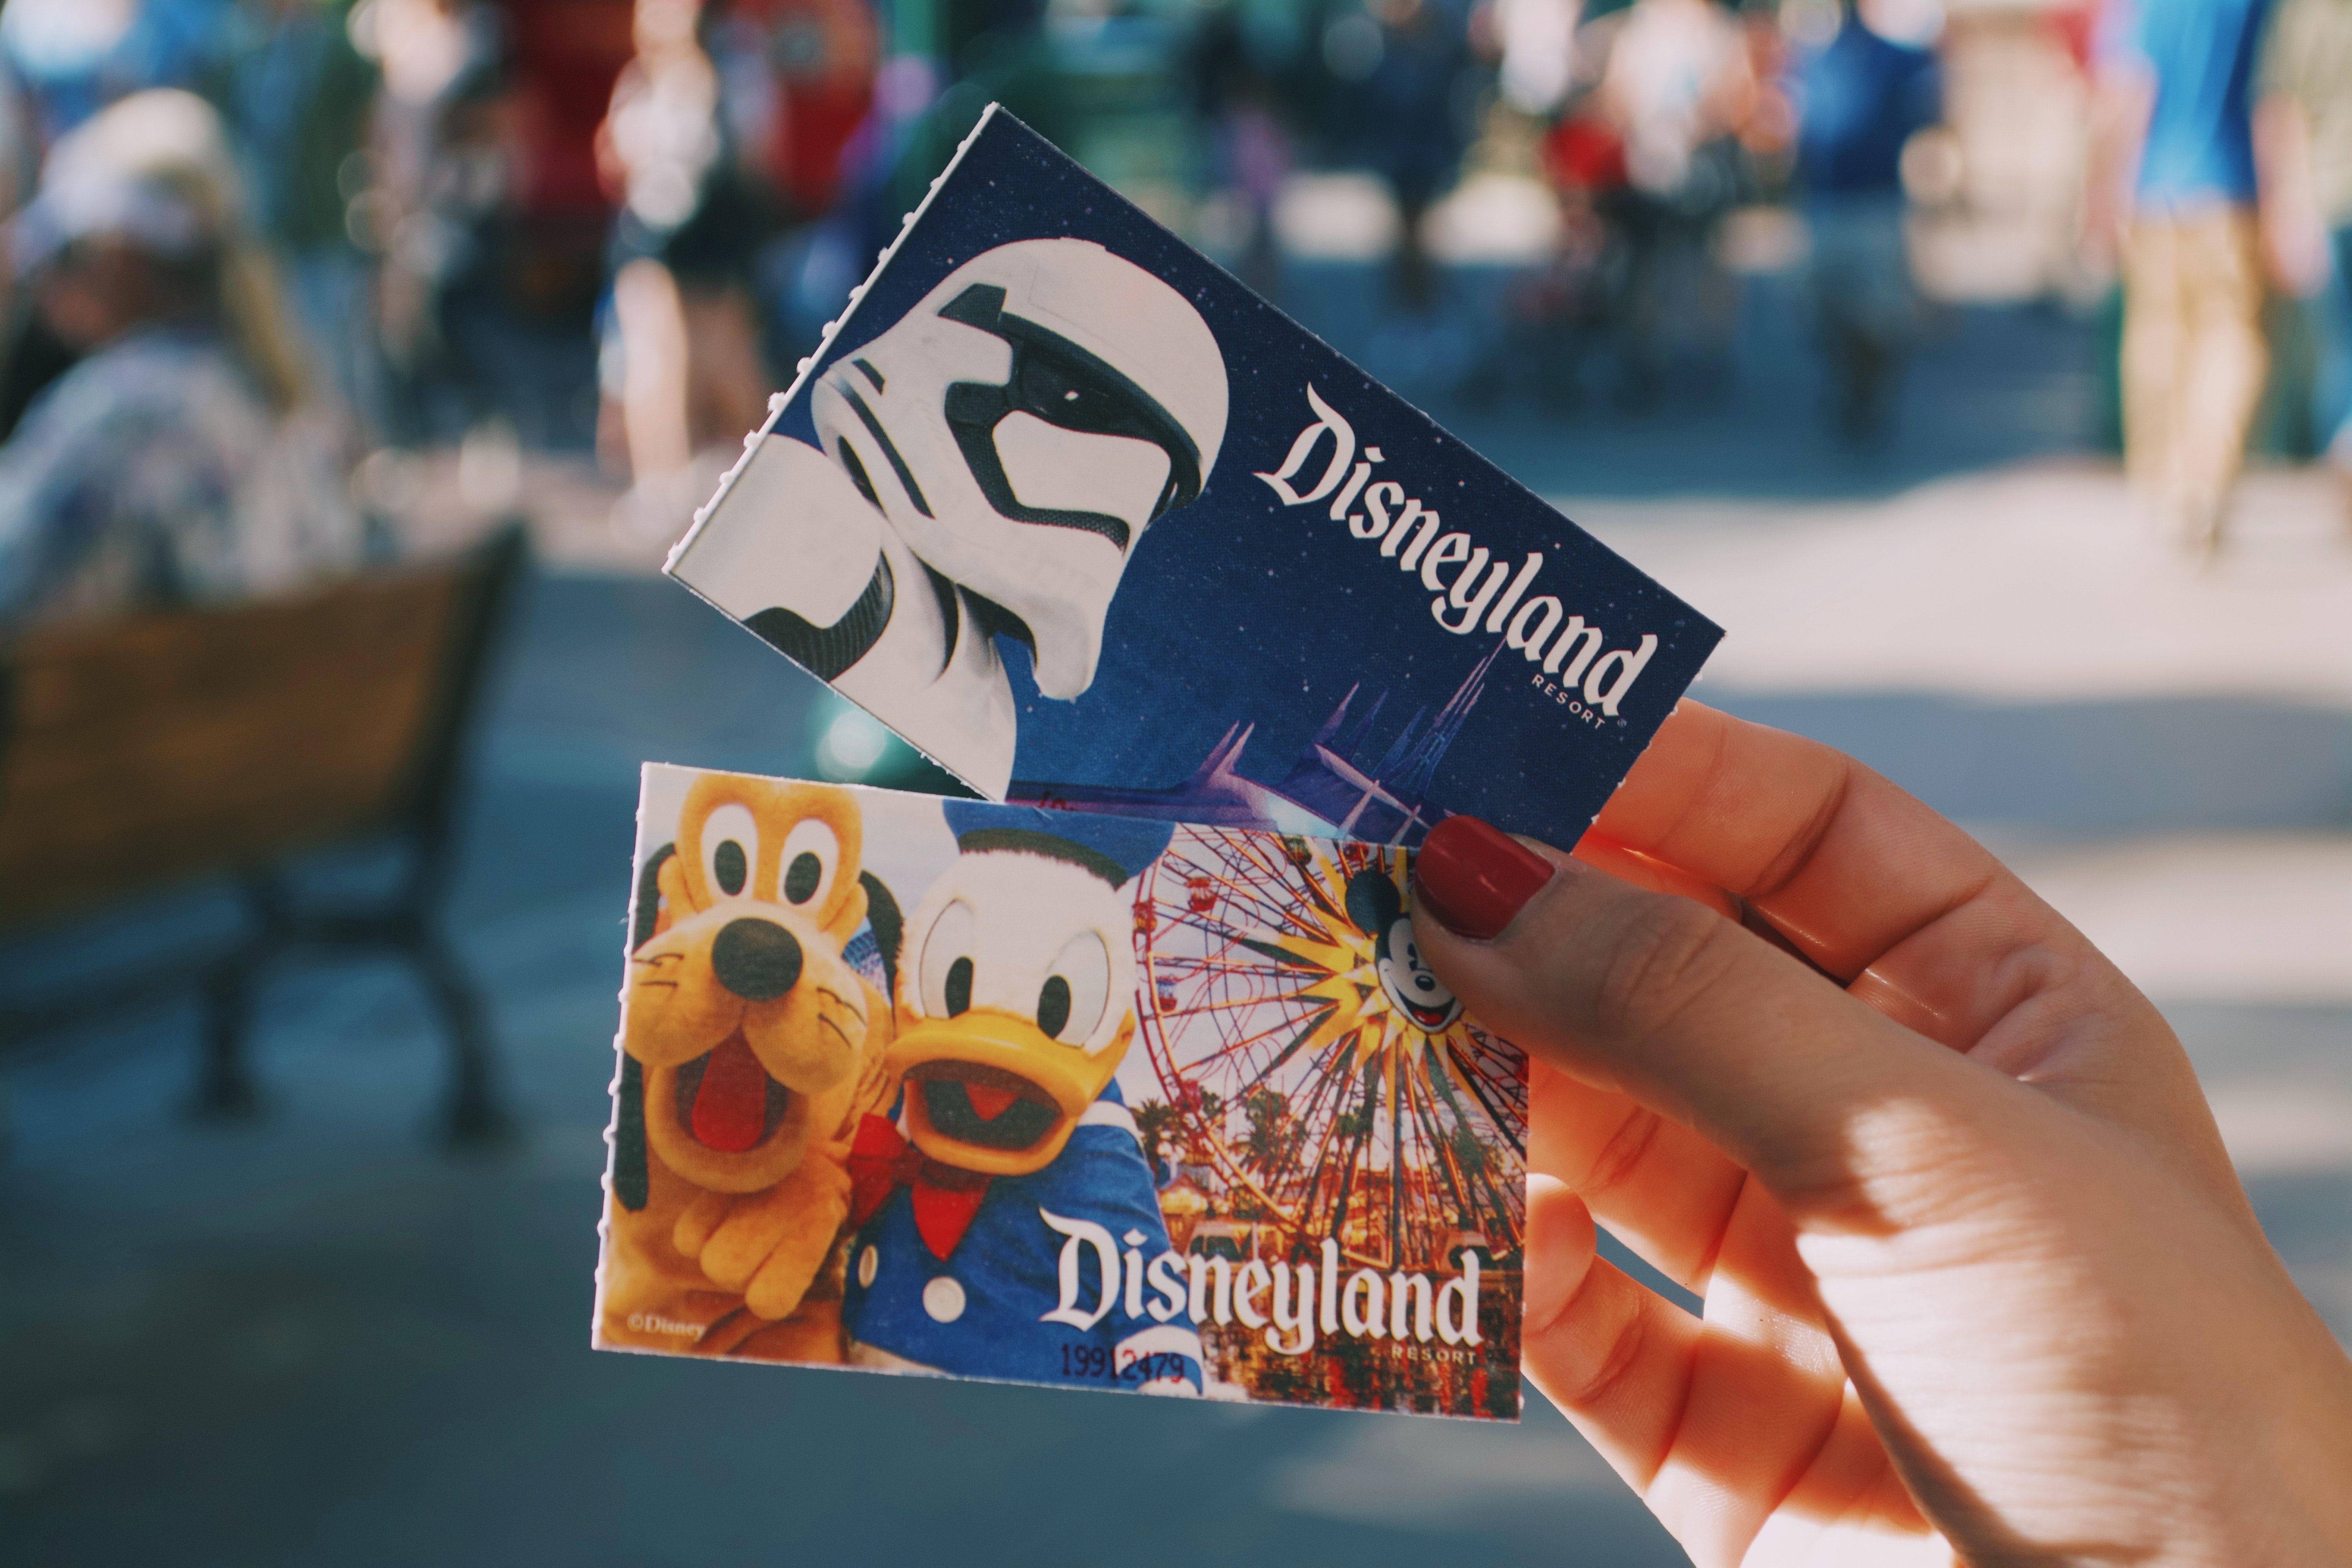 Stacey told Ethan that Chuck wasn't going to Disneyland. | Source: Unsplash